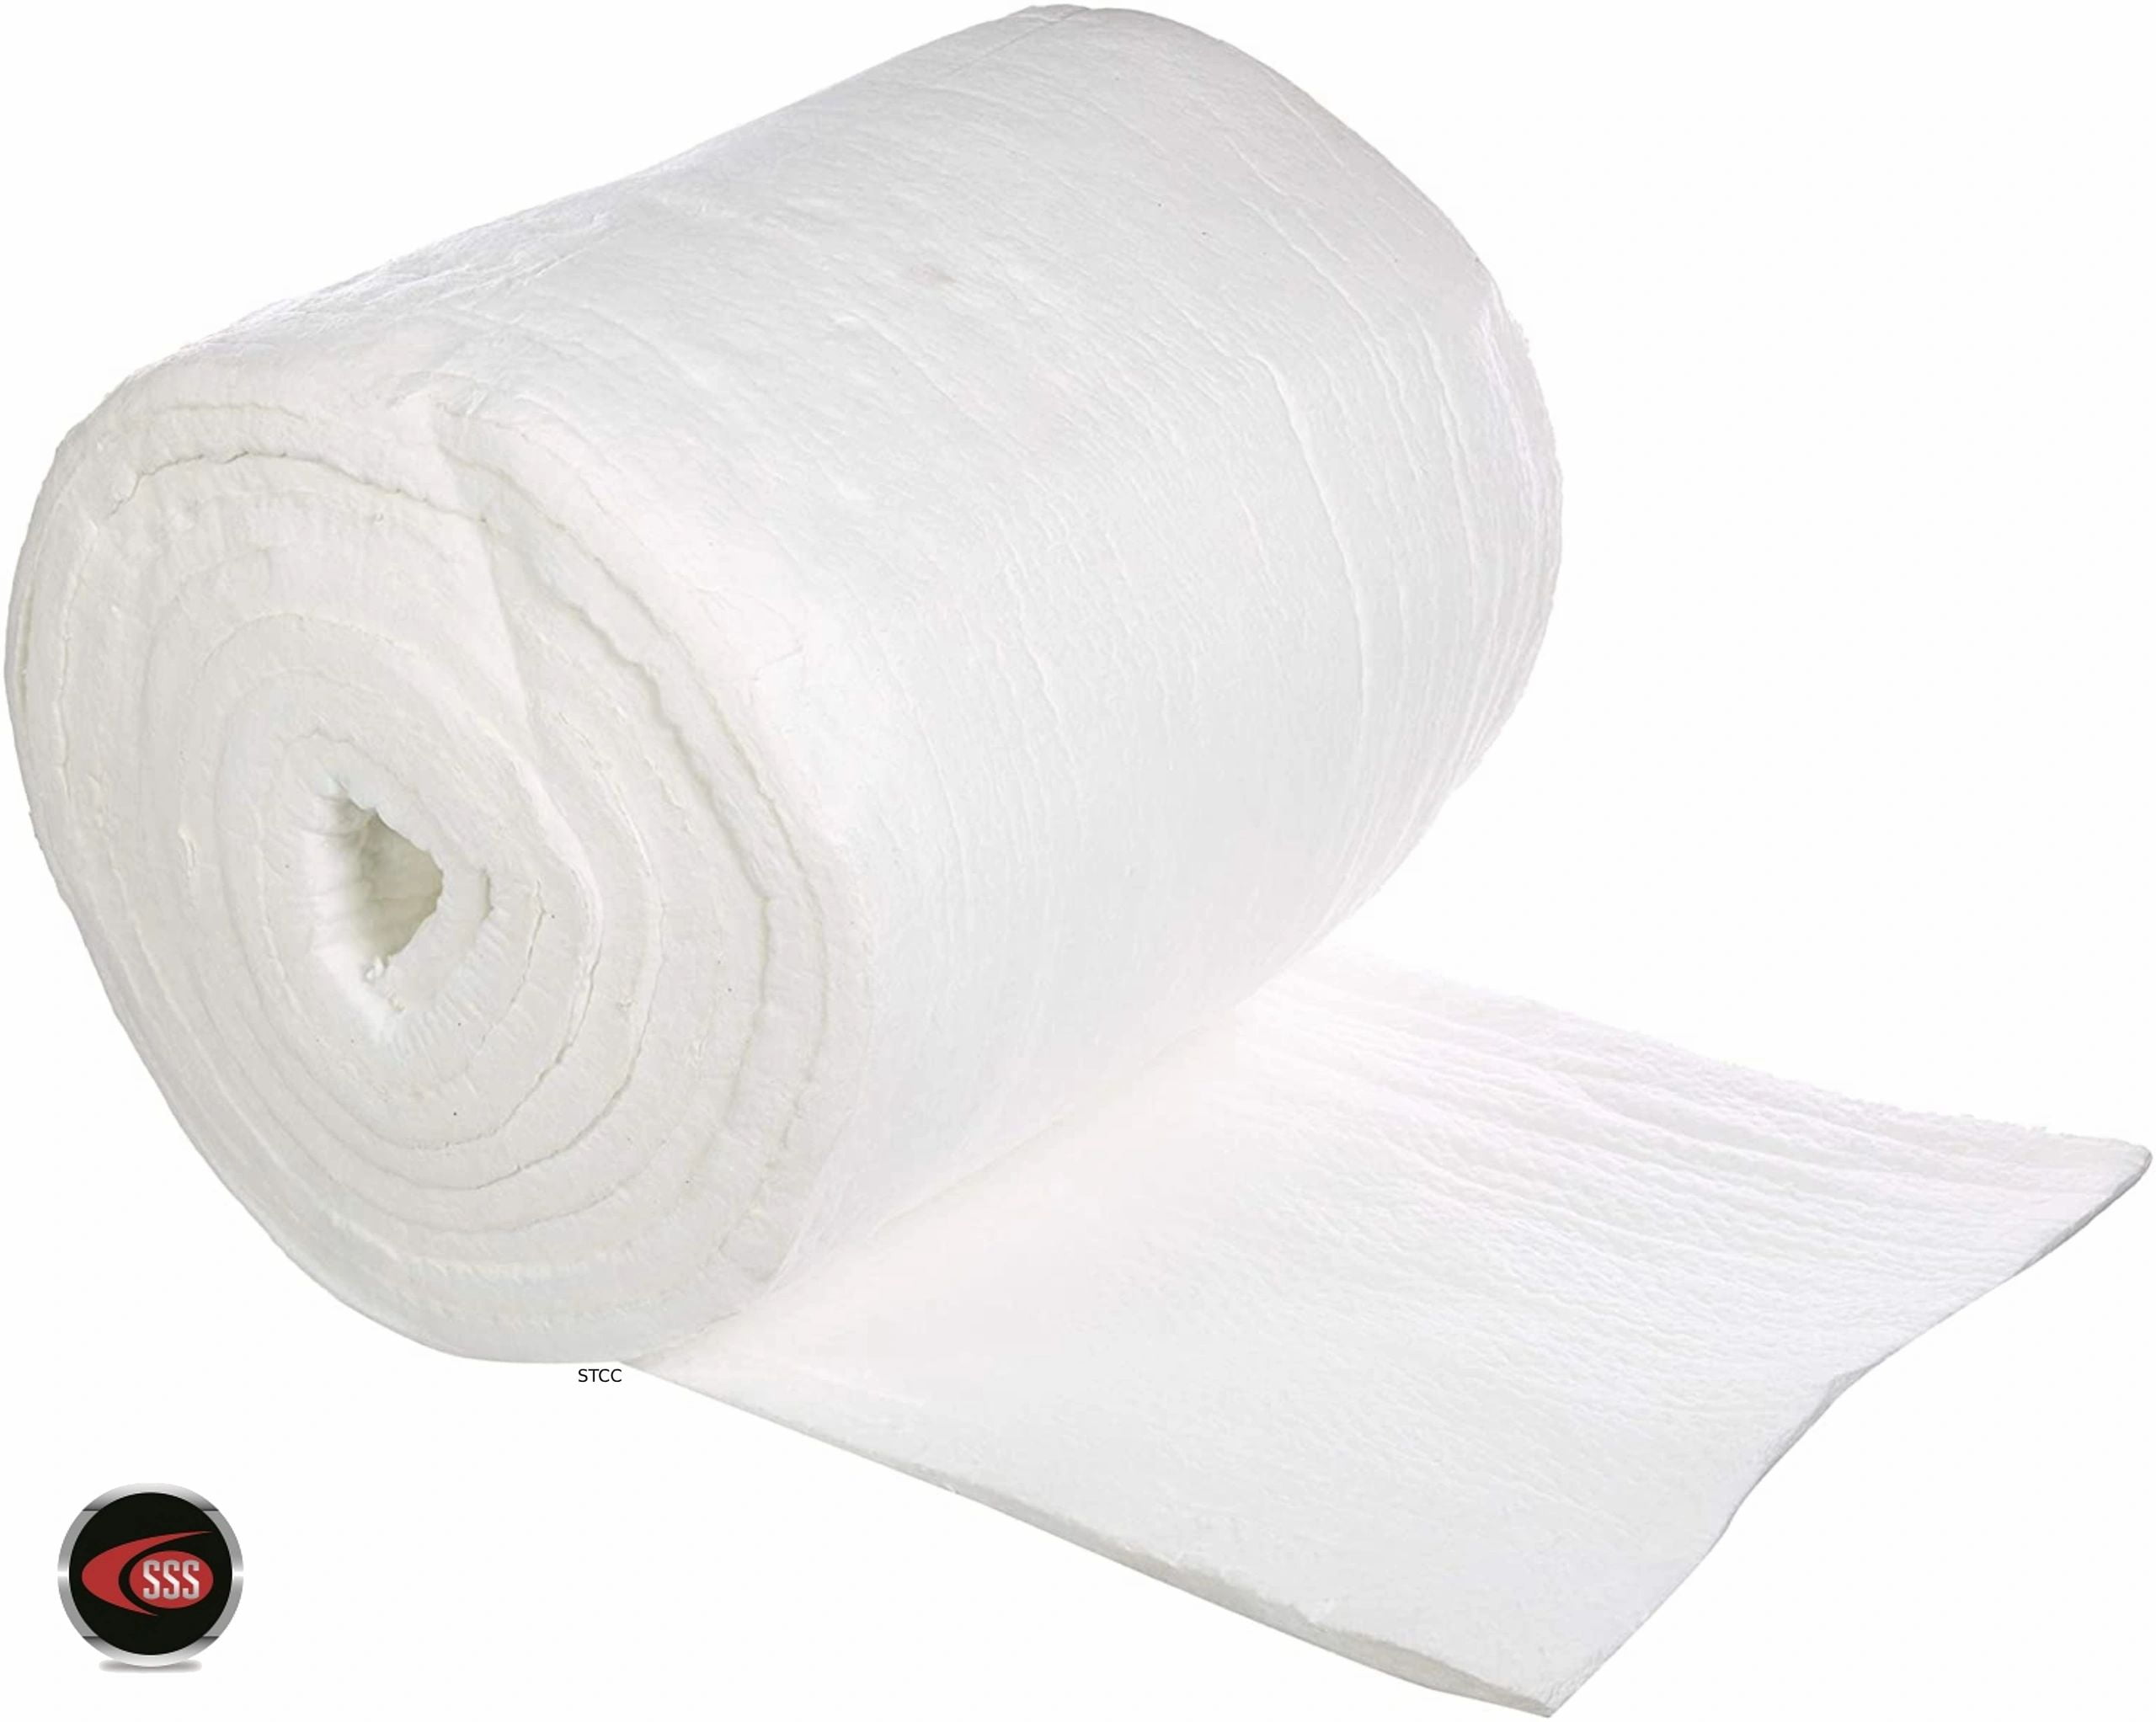 Ceramic Fiber Blanket Insulation 6# 2300F 1x24x25' for Wood Stoves, Pizza  Ovens, Kilns, Forges & More - 6# Pound 2300 Degrees (Qty 1 Box) 